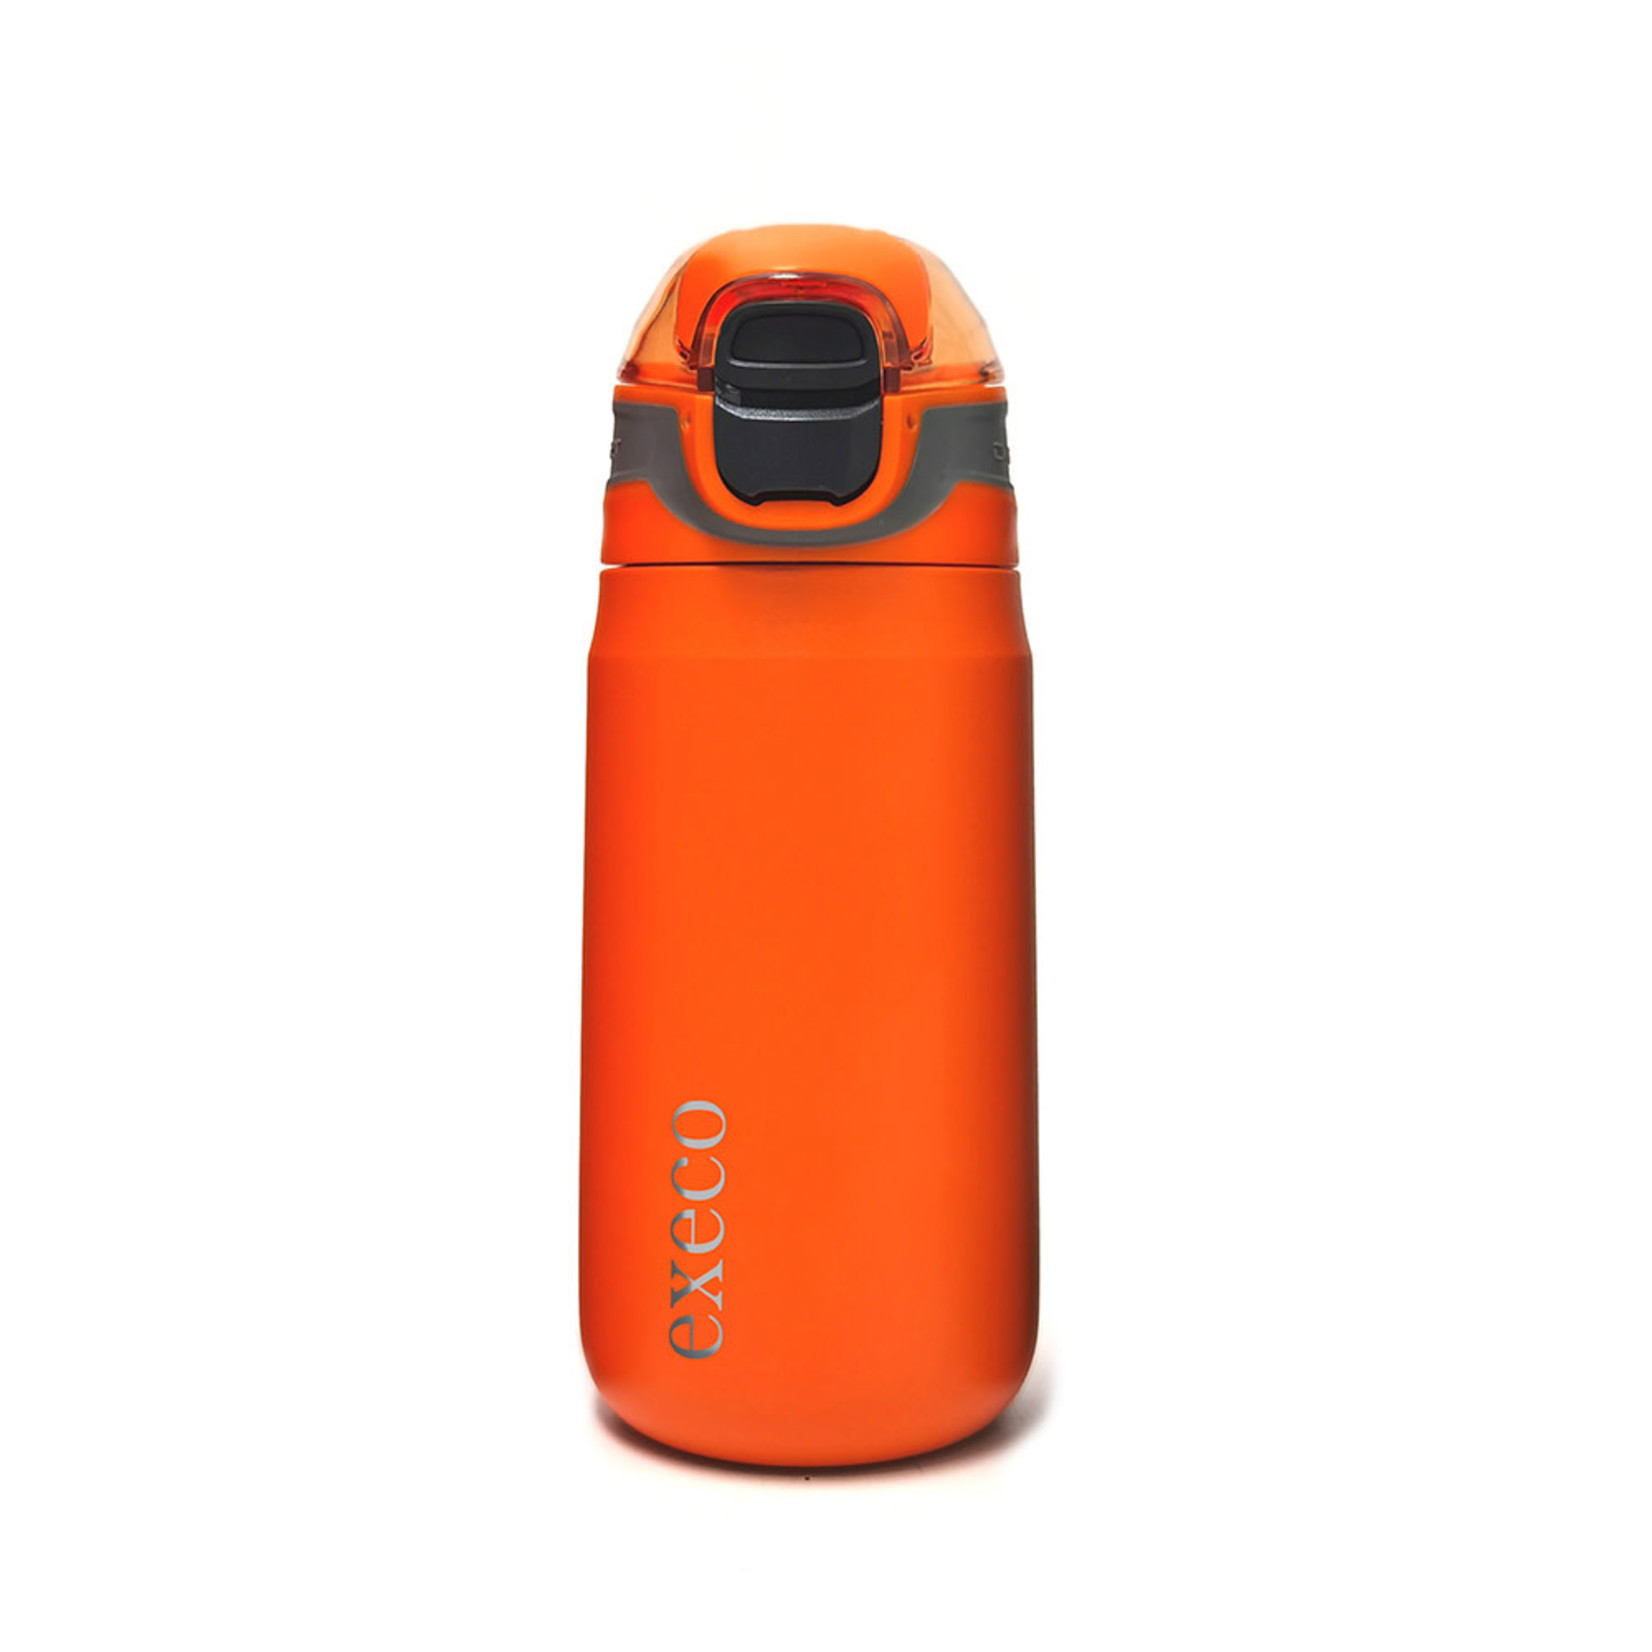 GEOCAN GEOCAN (Execo) - Stainless Steel Insulated Bottle with Lockable Lid - Orange